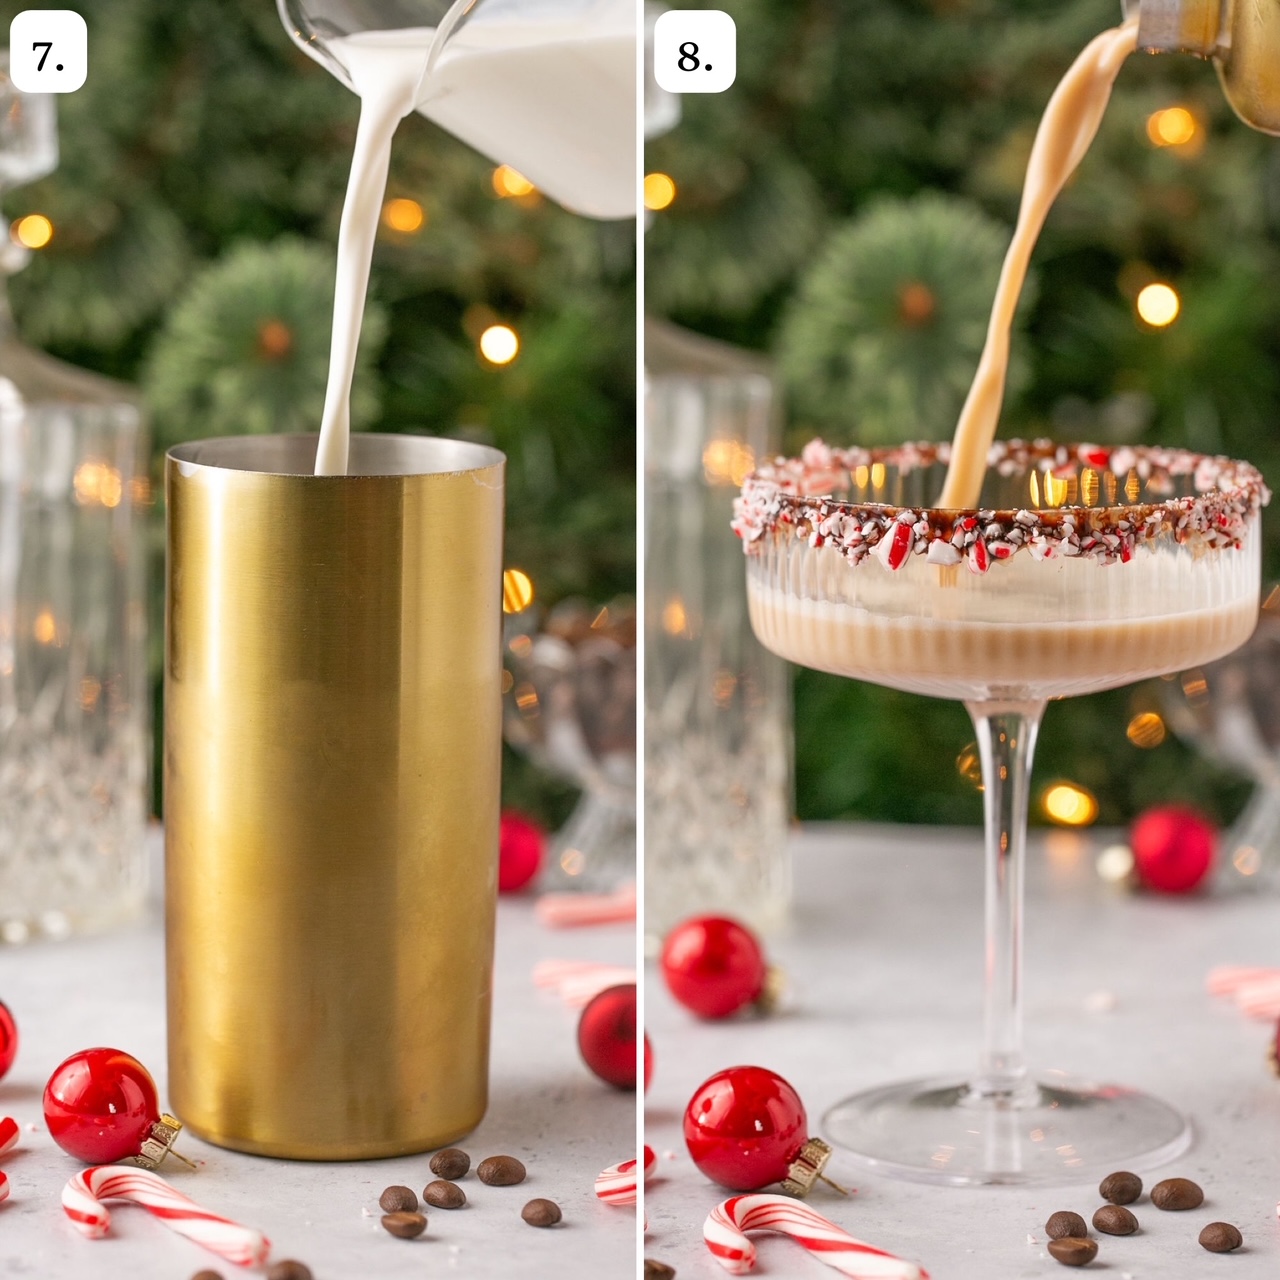 Steps 7 and 8 for making espresso martinis with peppermint